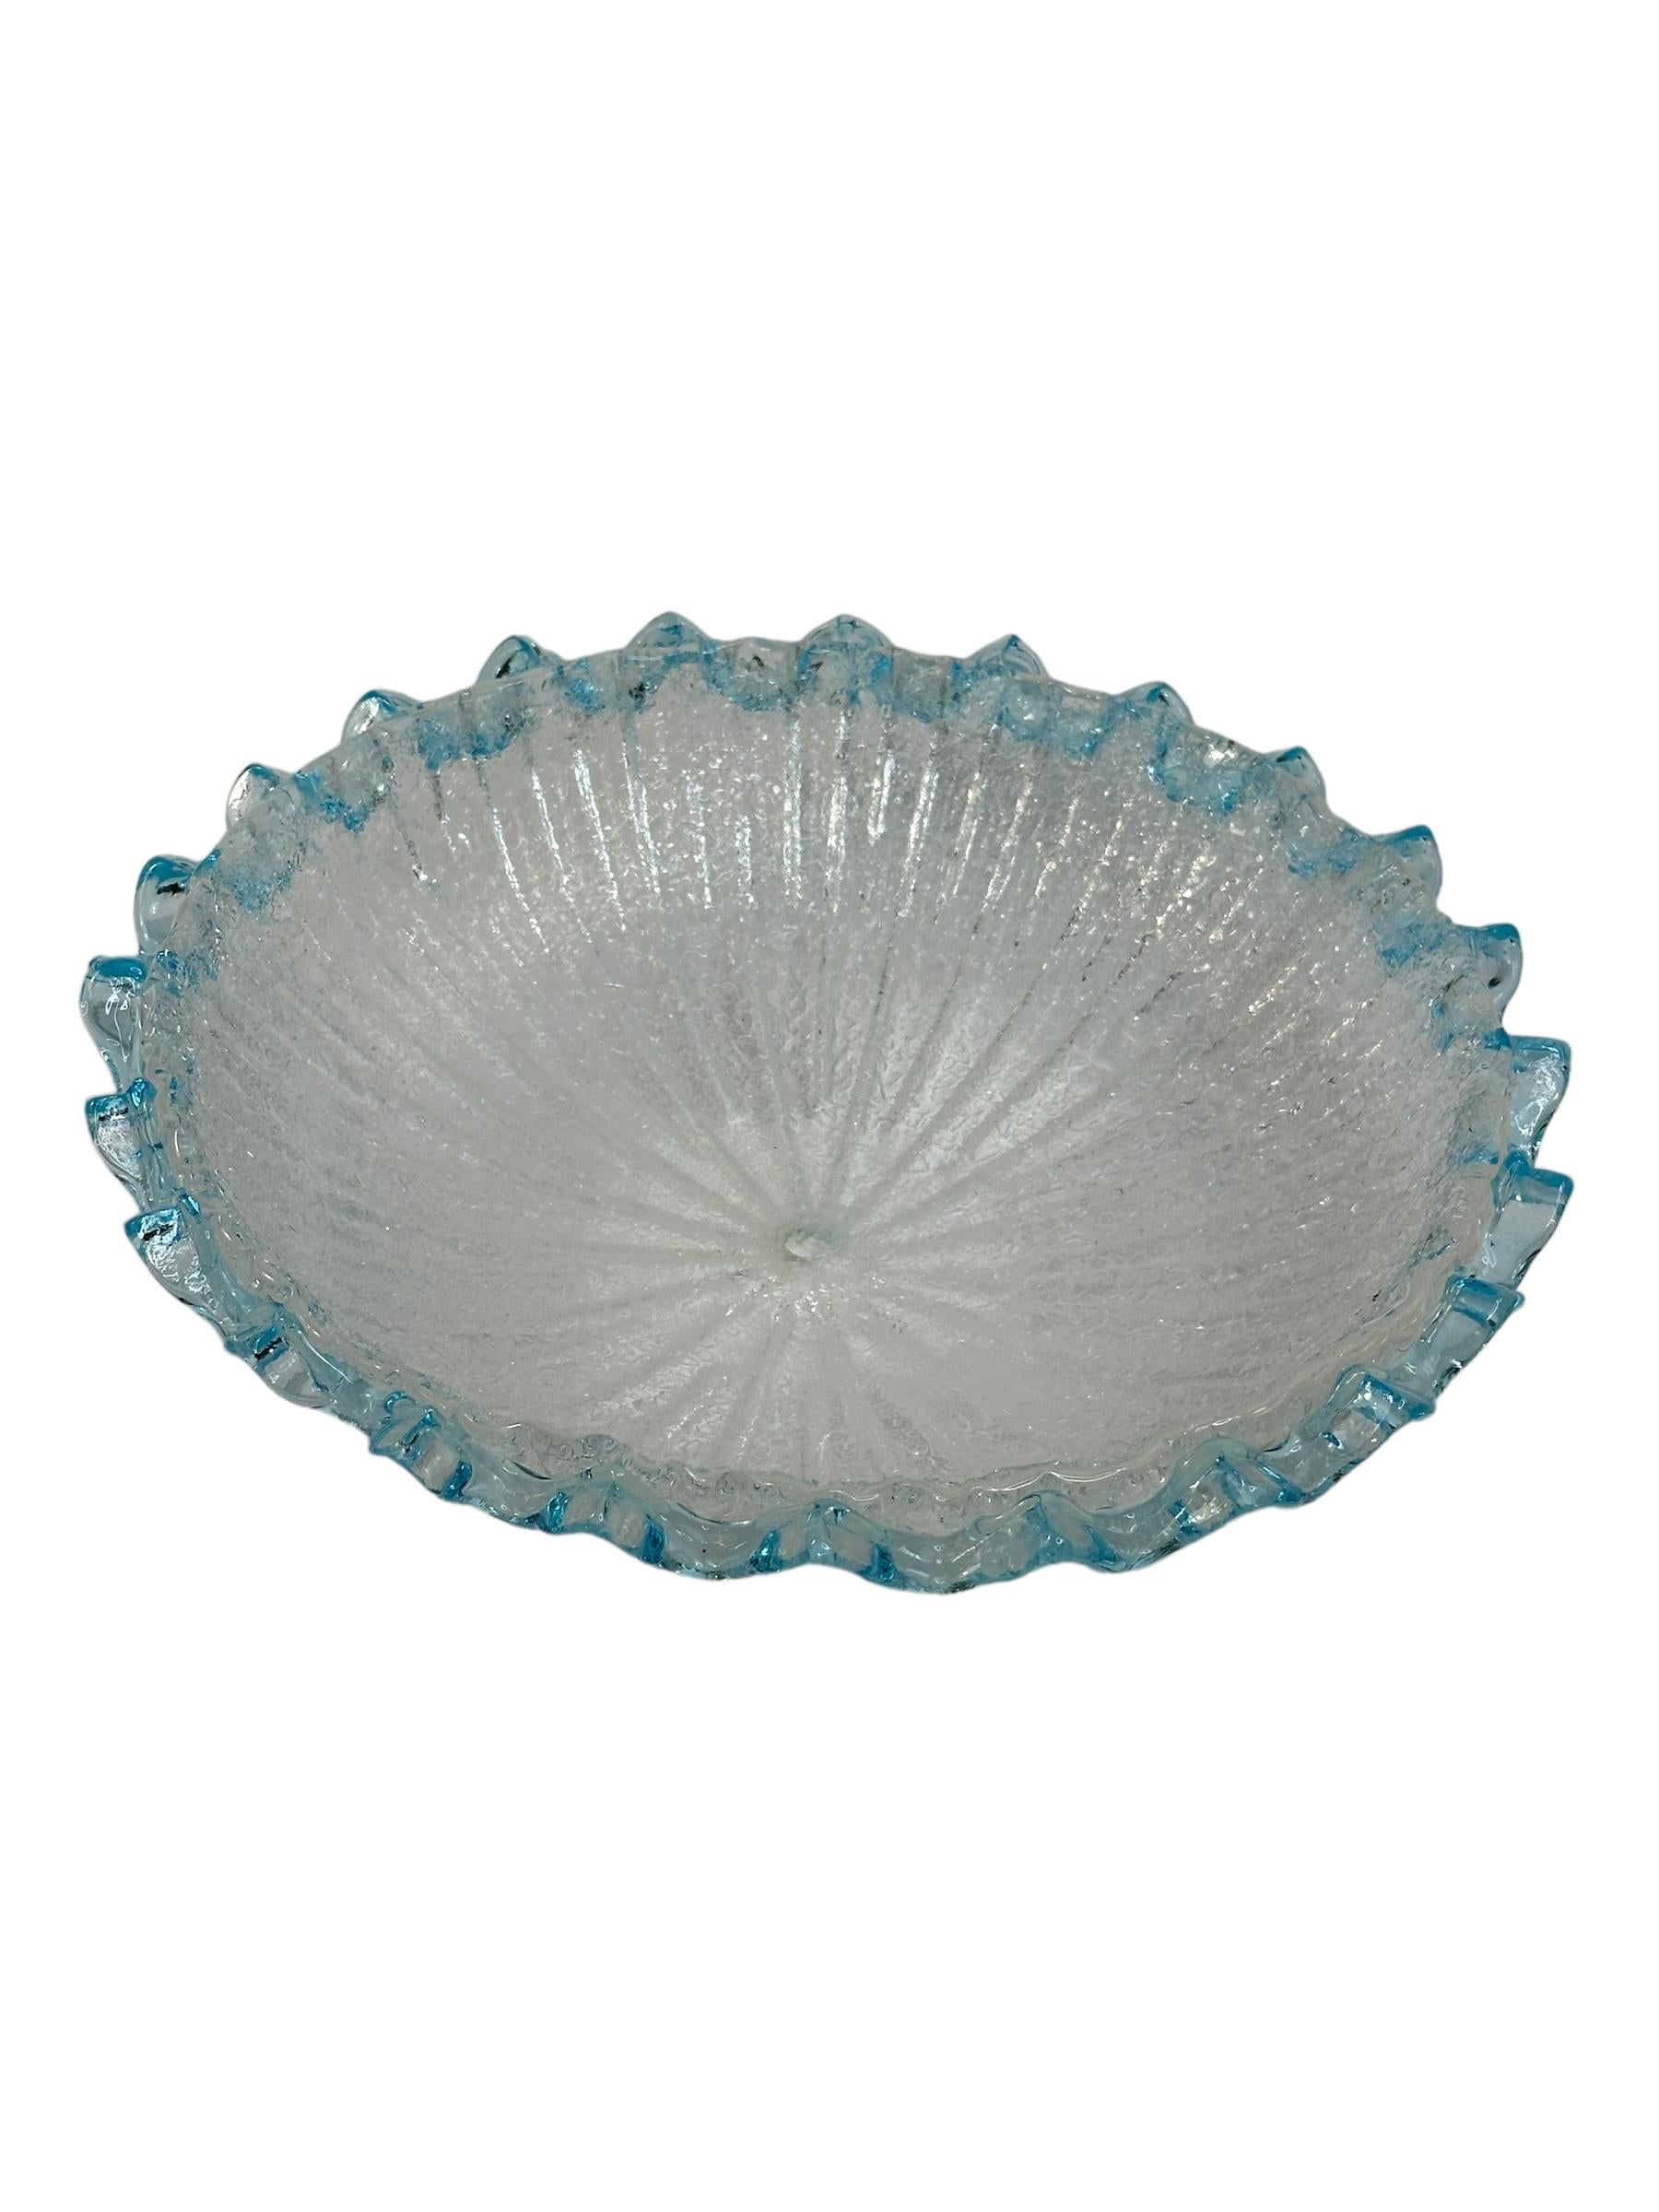 Clear and Light Blue Murano Glass Flush Mount Ceiling Light, Italy, 1970s For Sale 2